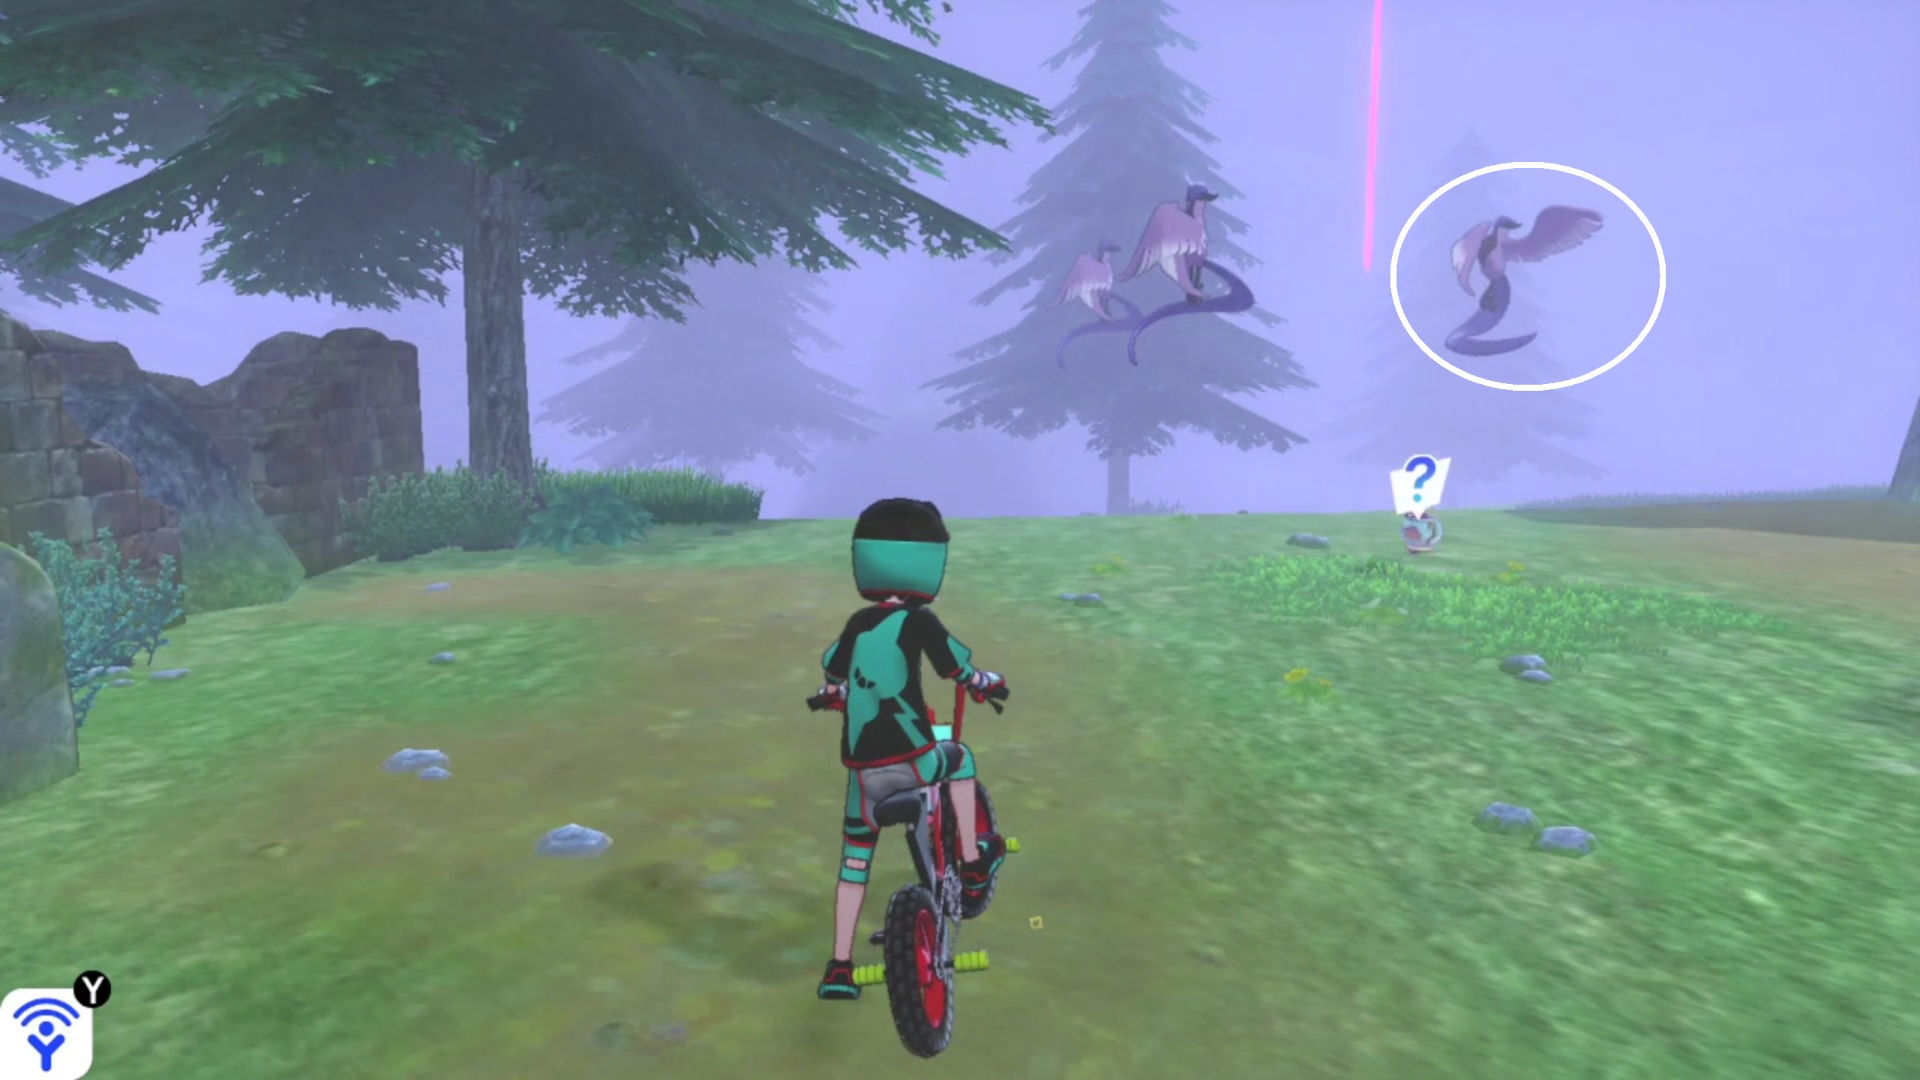 Pokémon Sword and Shield Galarian Articunos: Trainer on a bike with three Galarian Articunos in the field ahead. The real one has been circled in white.